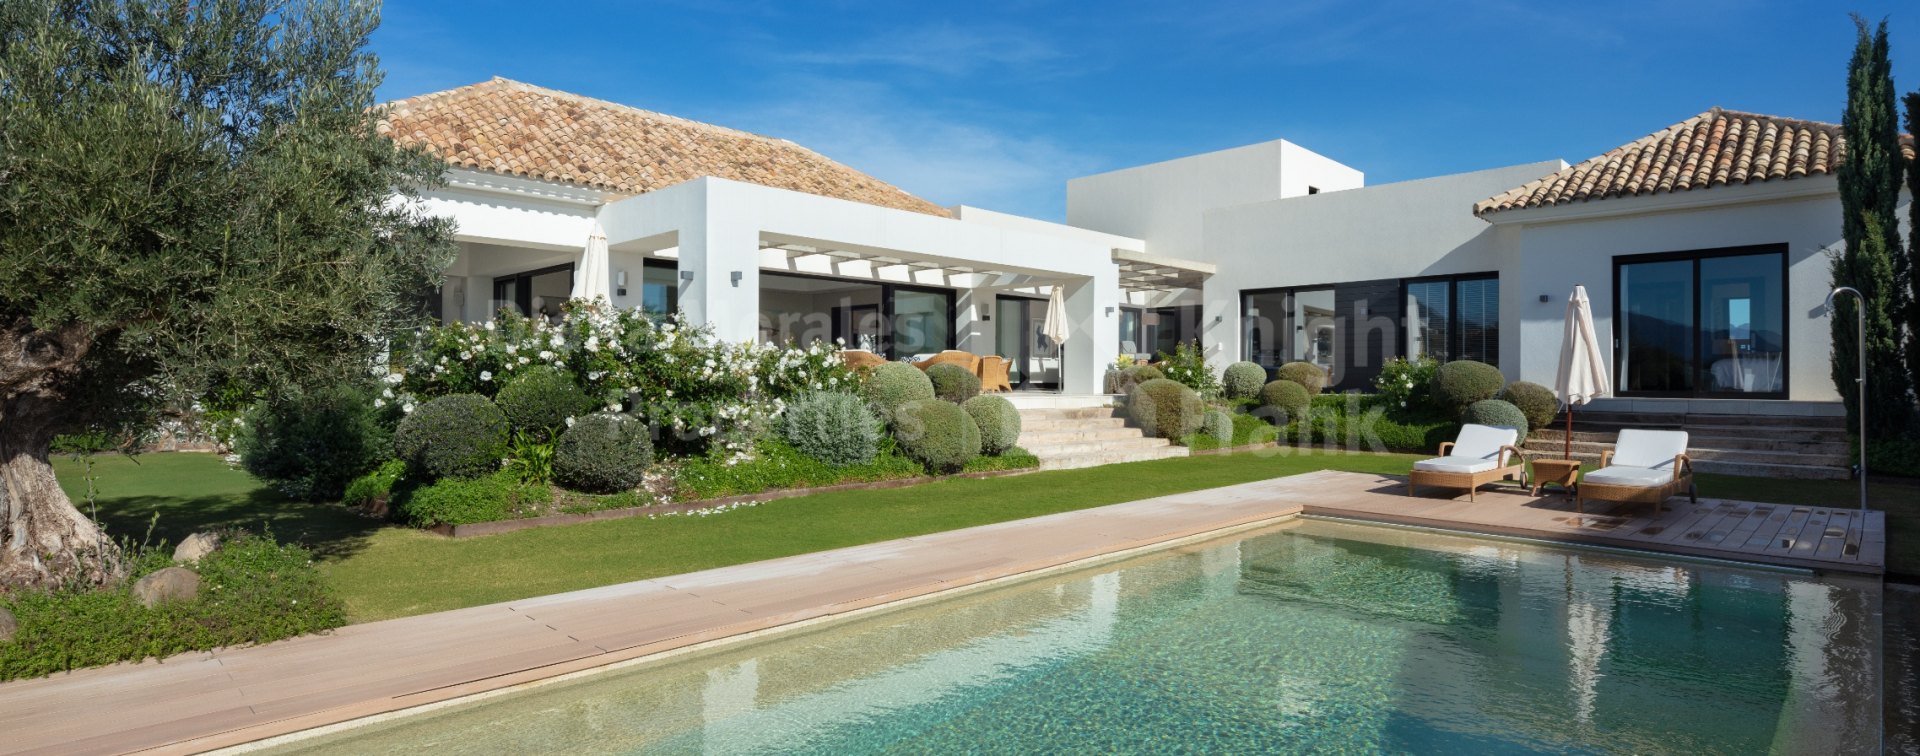 Haza del Conde, Casa Nevis: An exquisite with stunning views of the Golf Valley in Marbella